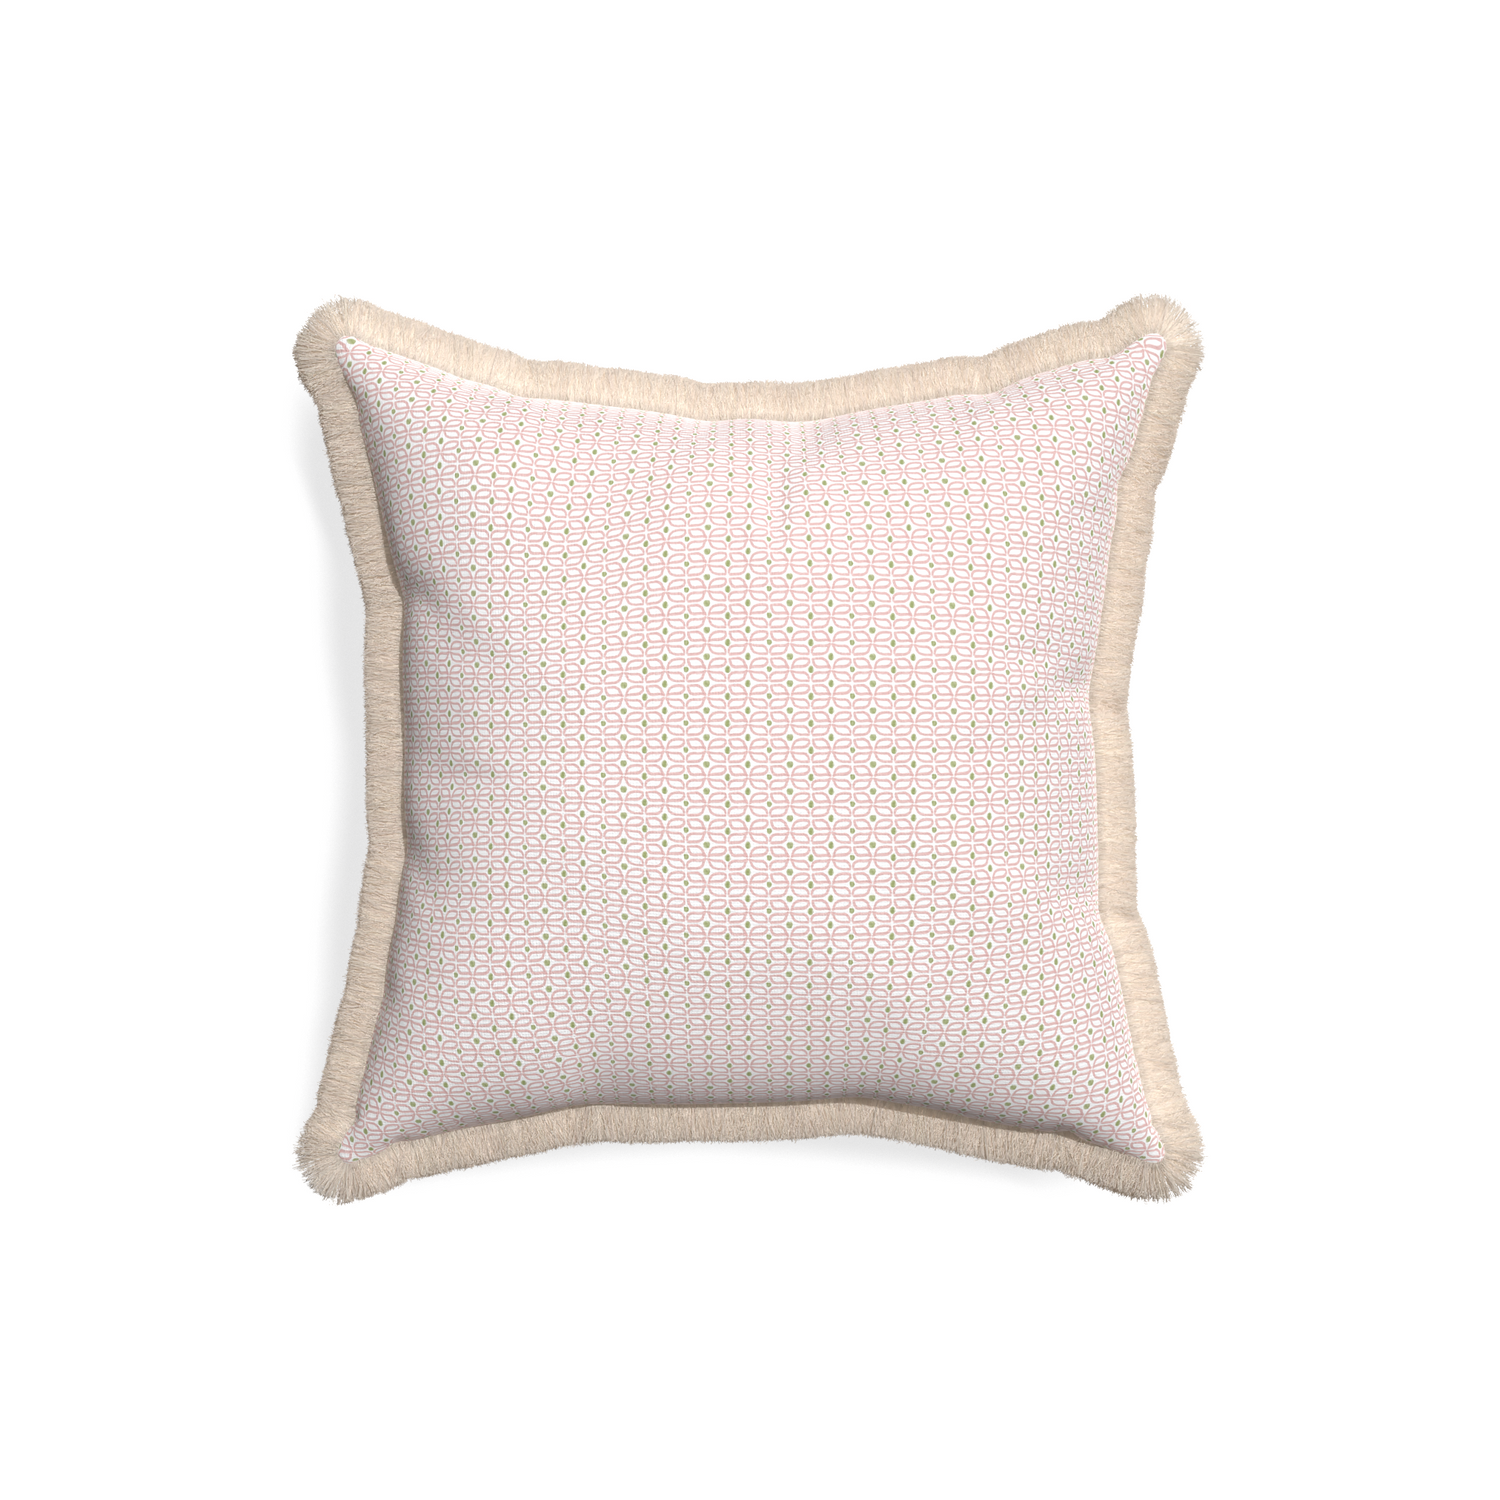 18-square loomi pink custom pink geometricpillow with cream fringe on white background